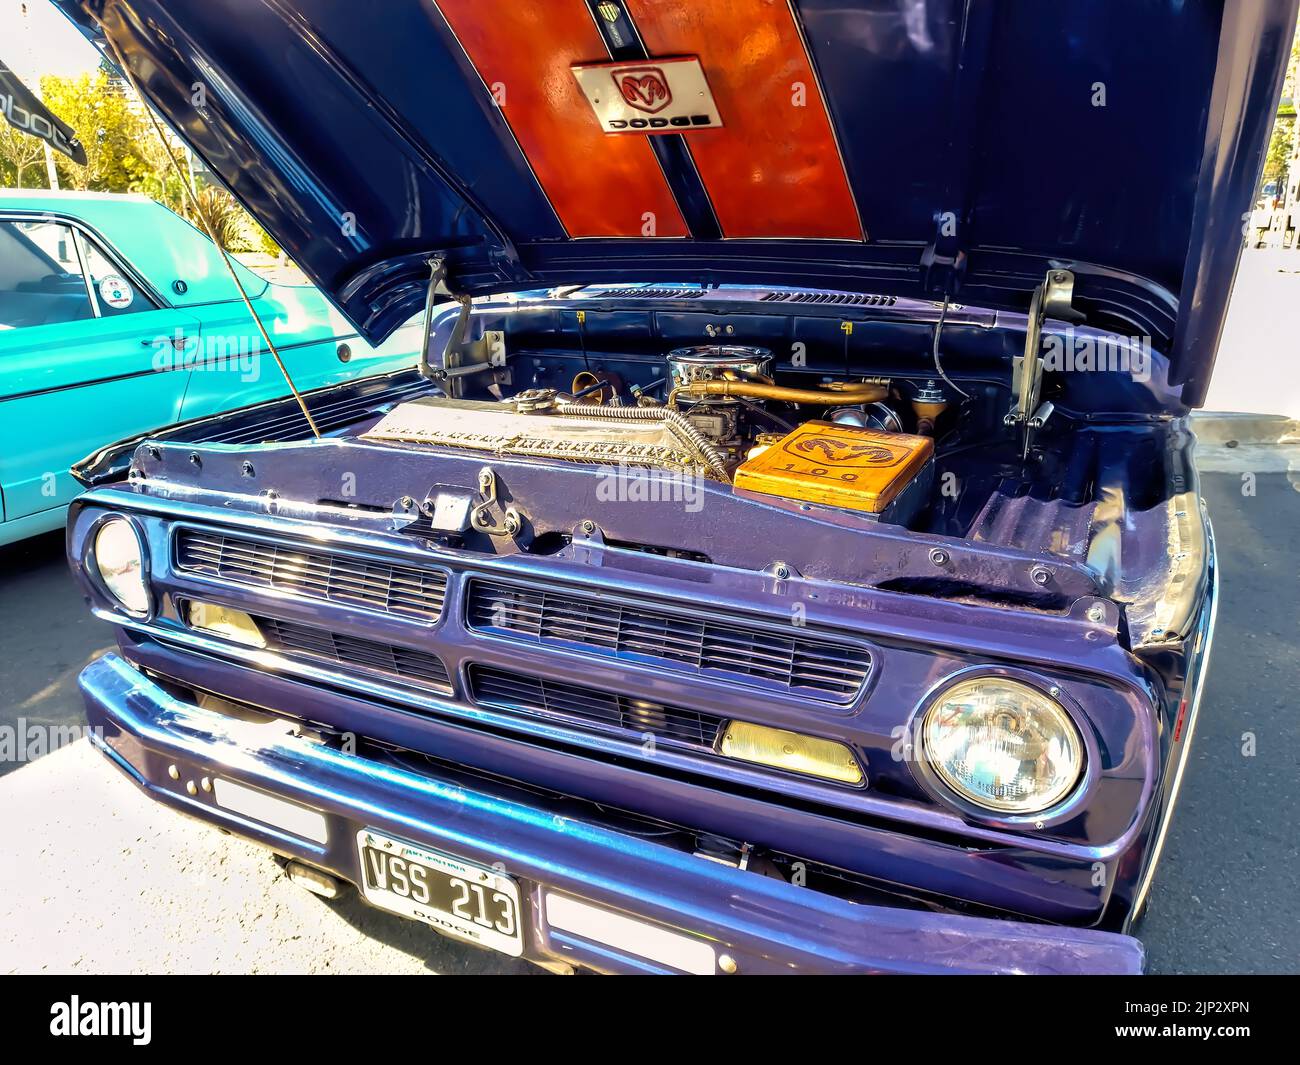 open hood of an old blue pickup truck 1960s Dodge D 100 by Chrysler showing the engine. Utility or farming tool. Expo Fierro 2022 classic car show Stock Photo